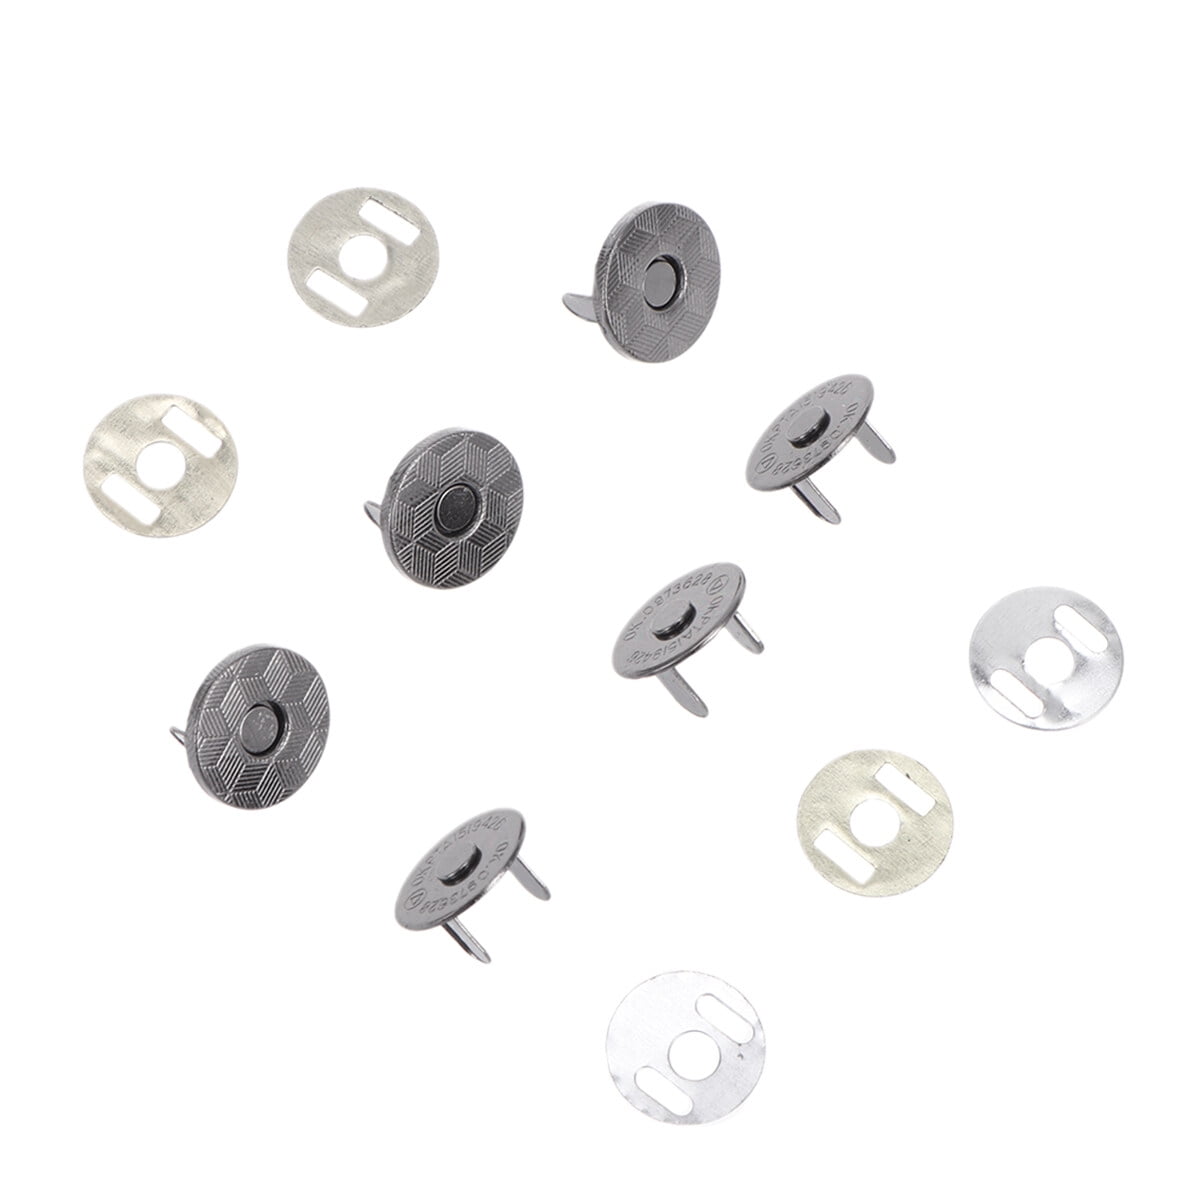 Magnetic Buttons, Magnet Fasteners, Magnetic Buckles